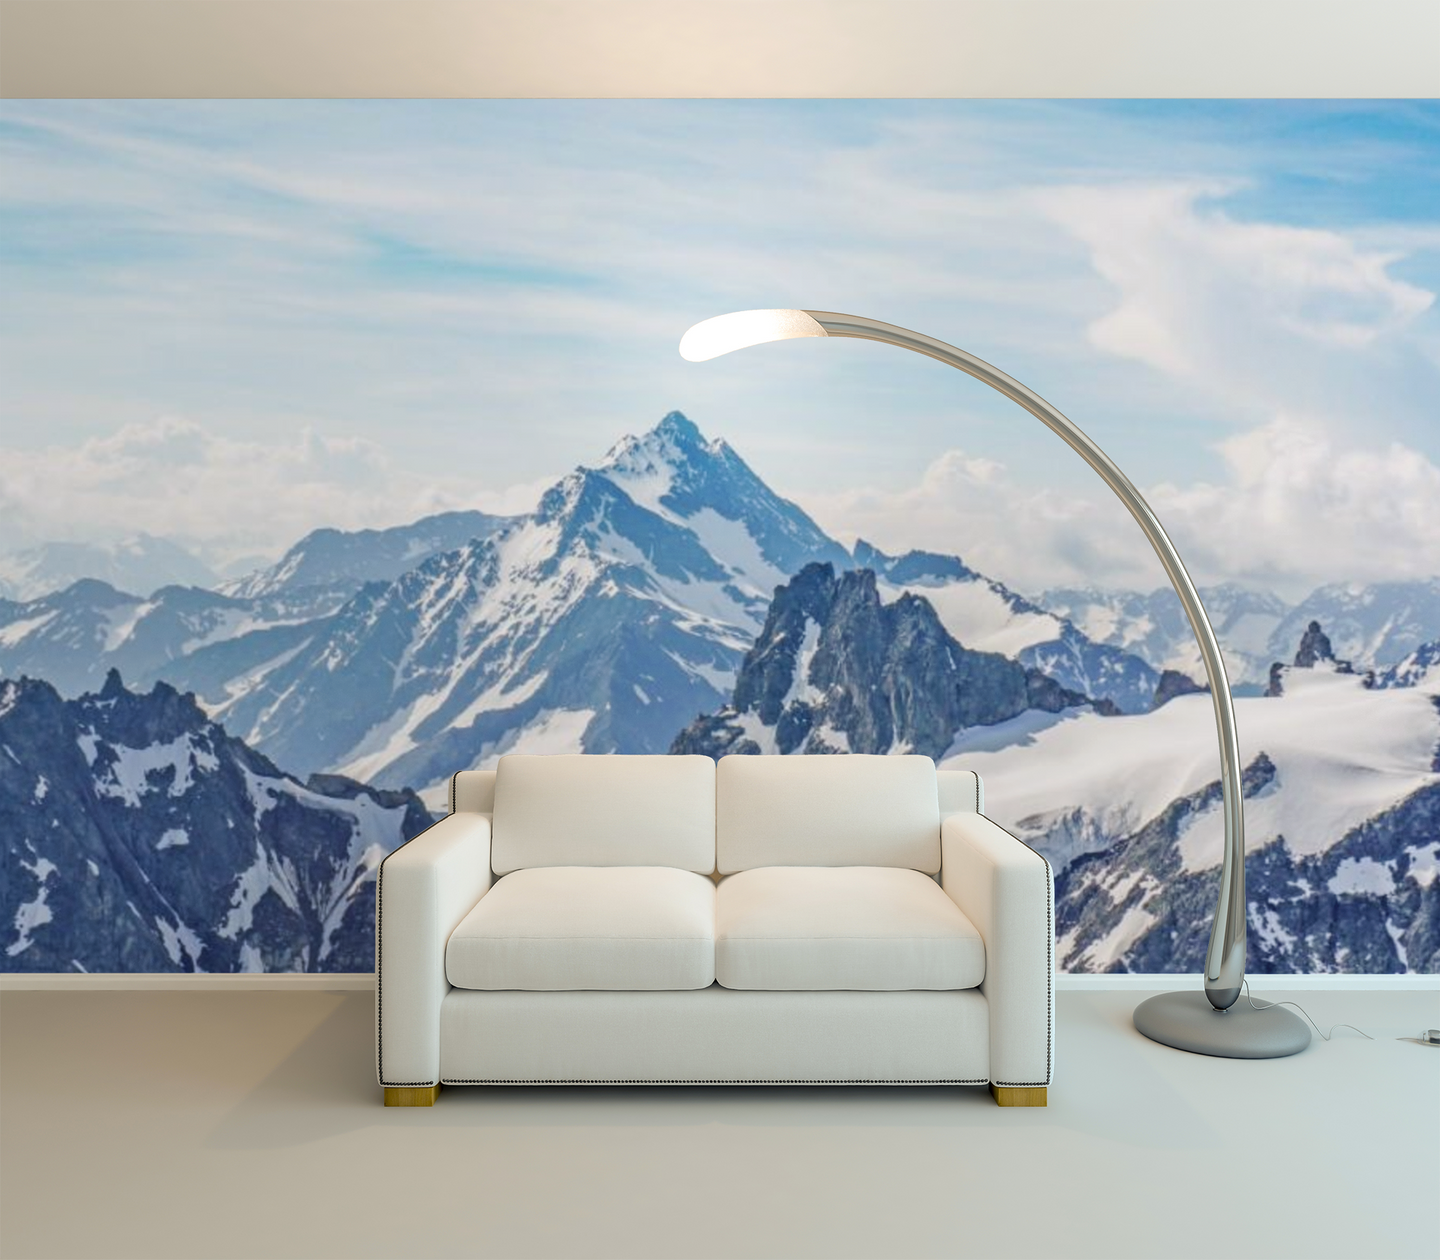 Snow in the Mountains - 0216 - Wall Murals Printing - wall art